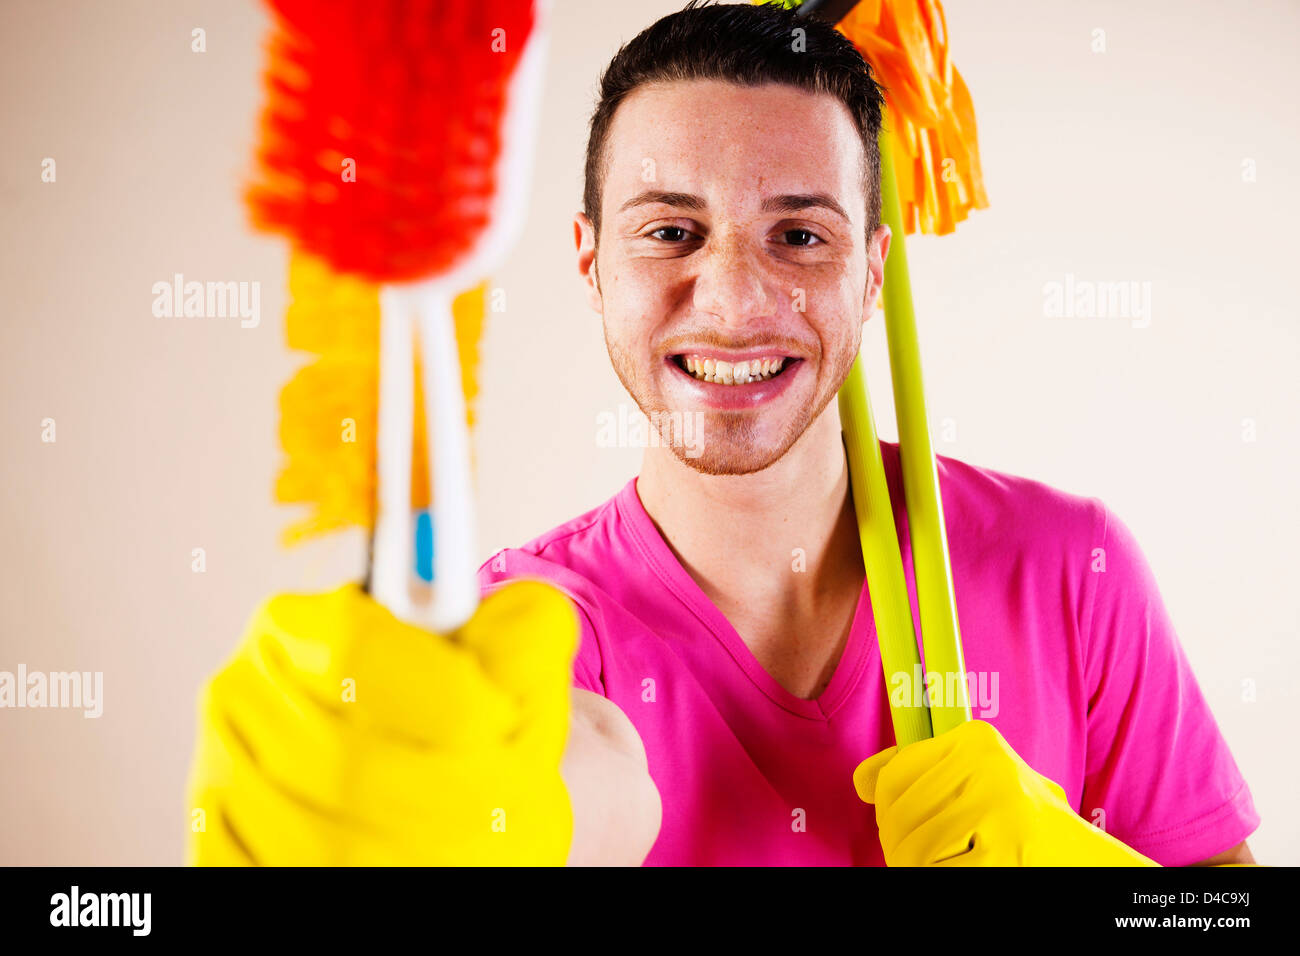 Happy young man housecleaning, portrait Stock Photo